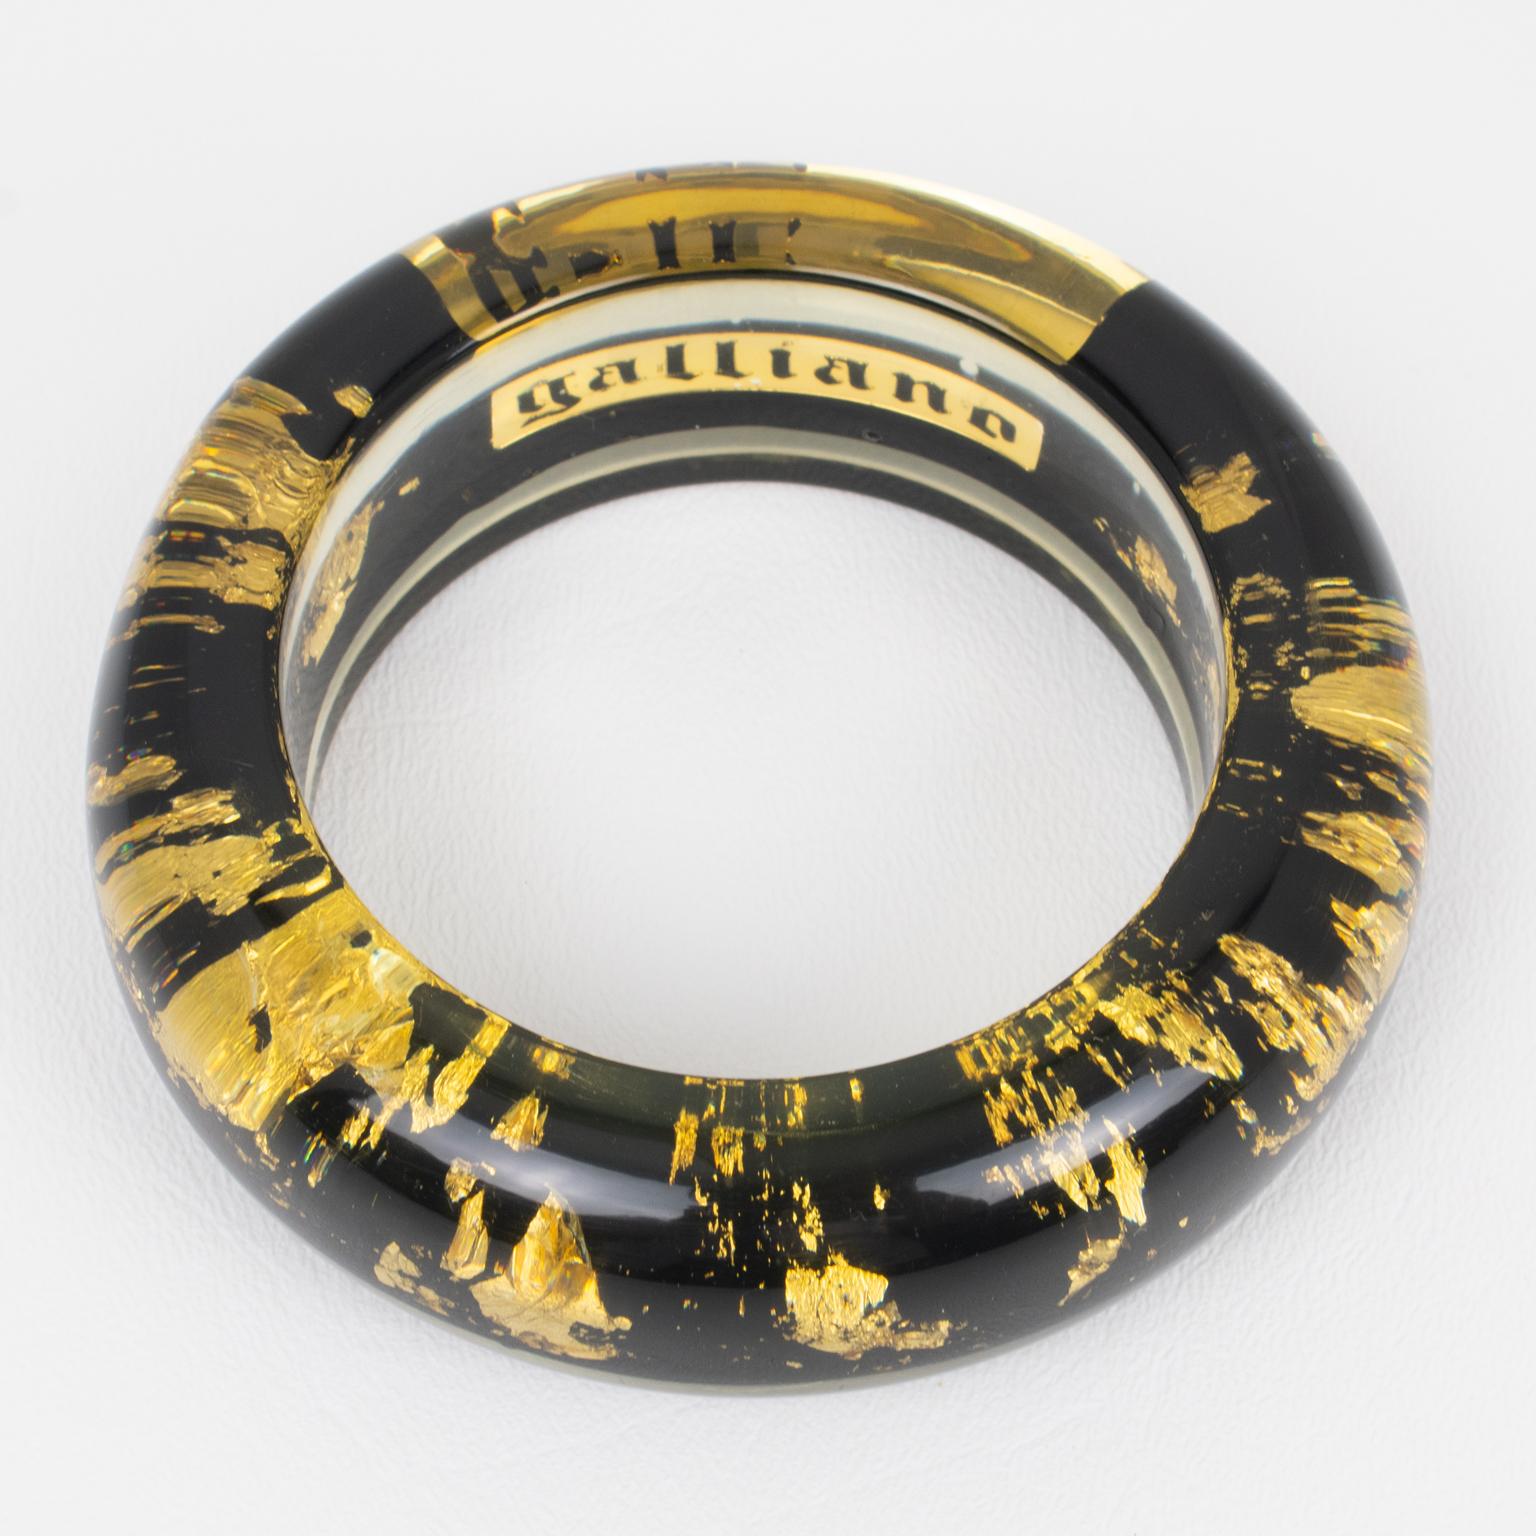 John Galliano Resin Acrylic Bracelet Bangle Gold Flakes Inclusions In Excellent Condition For Sale In Atlanta, GA